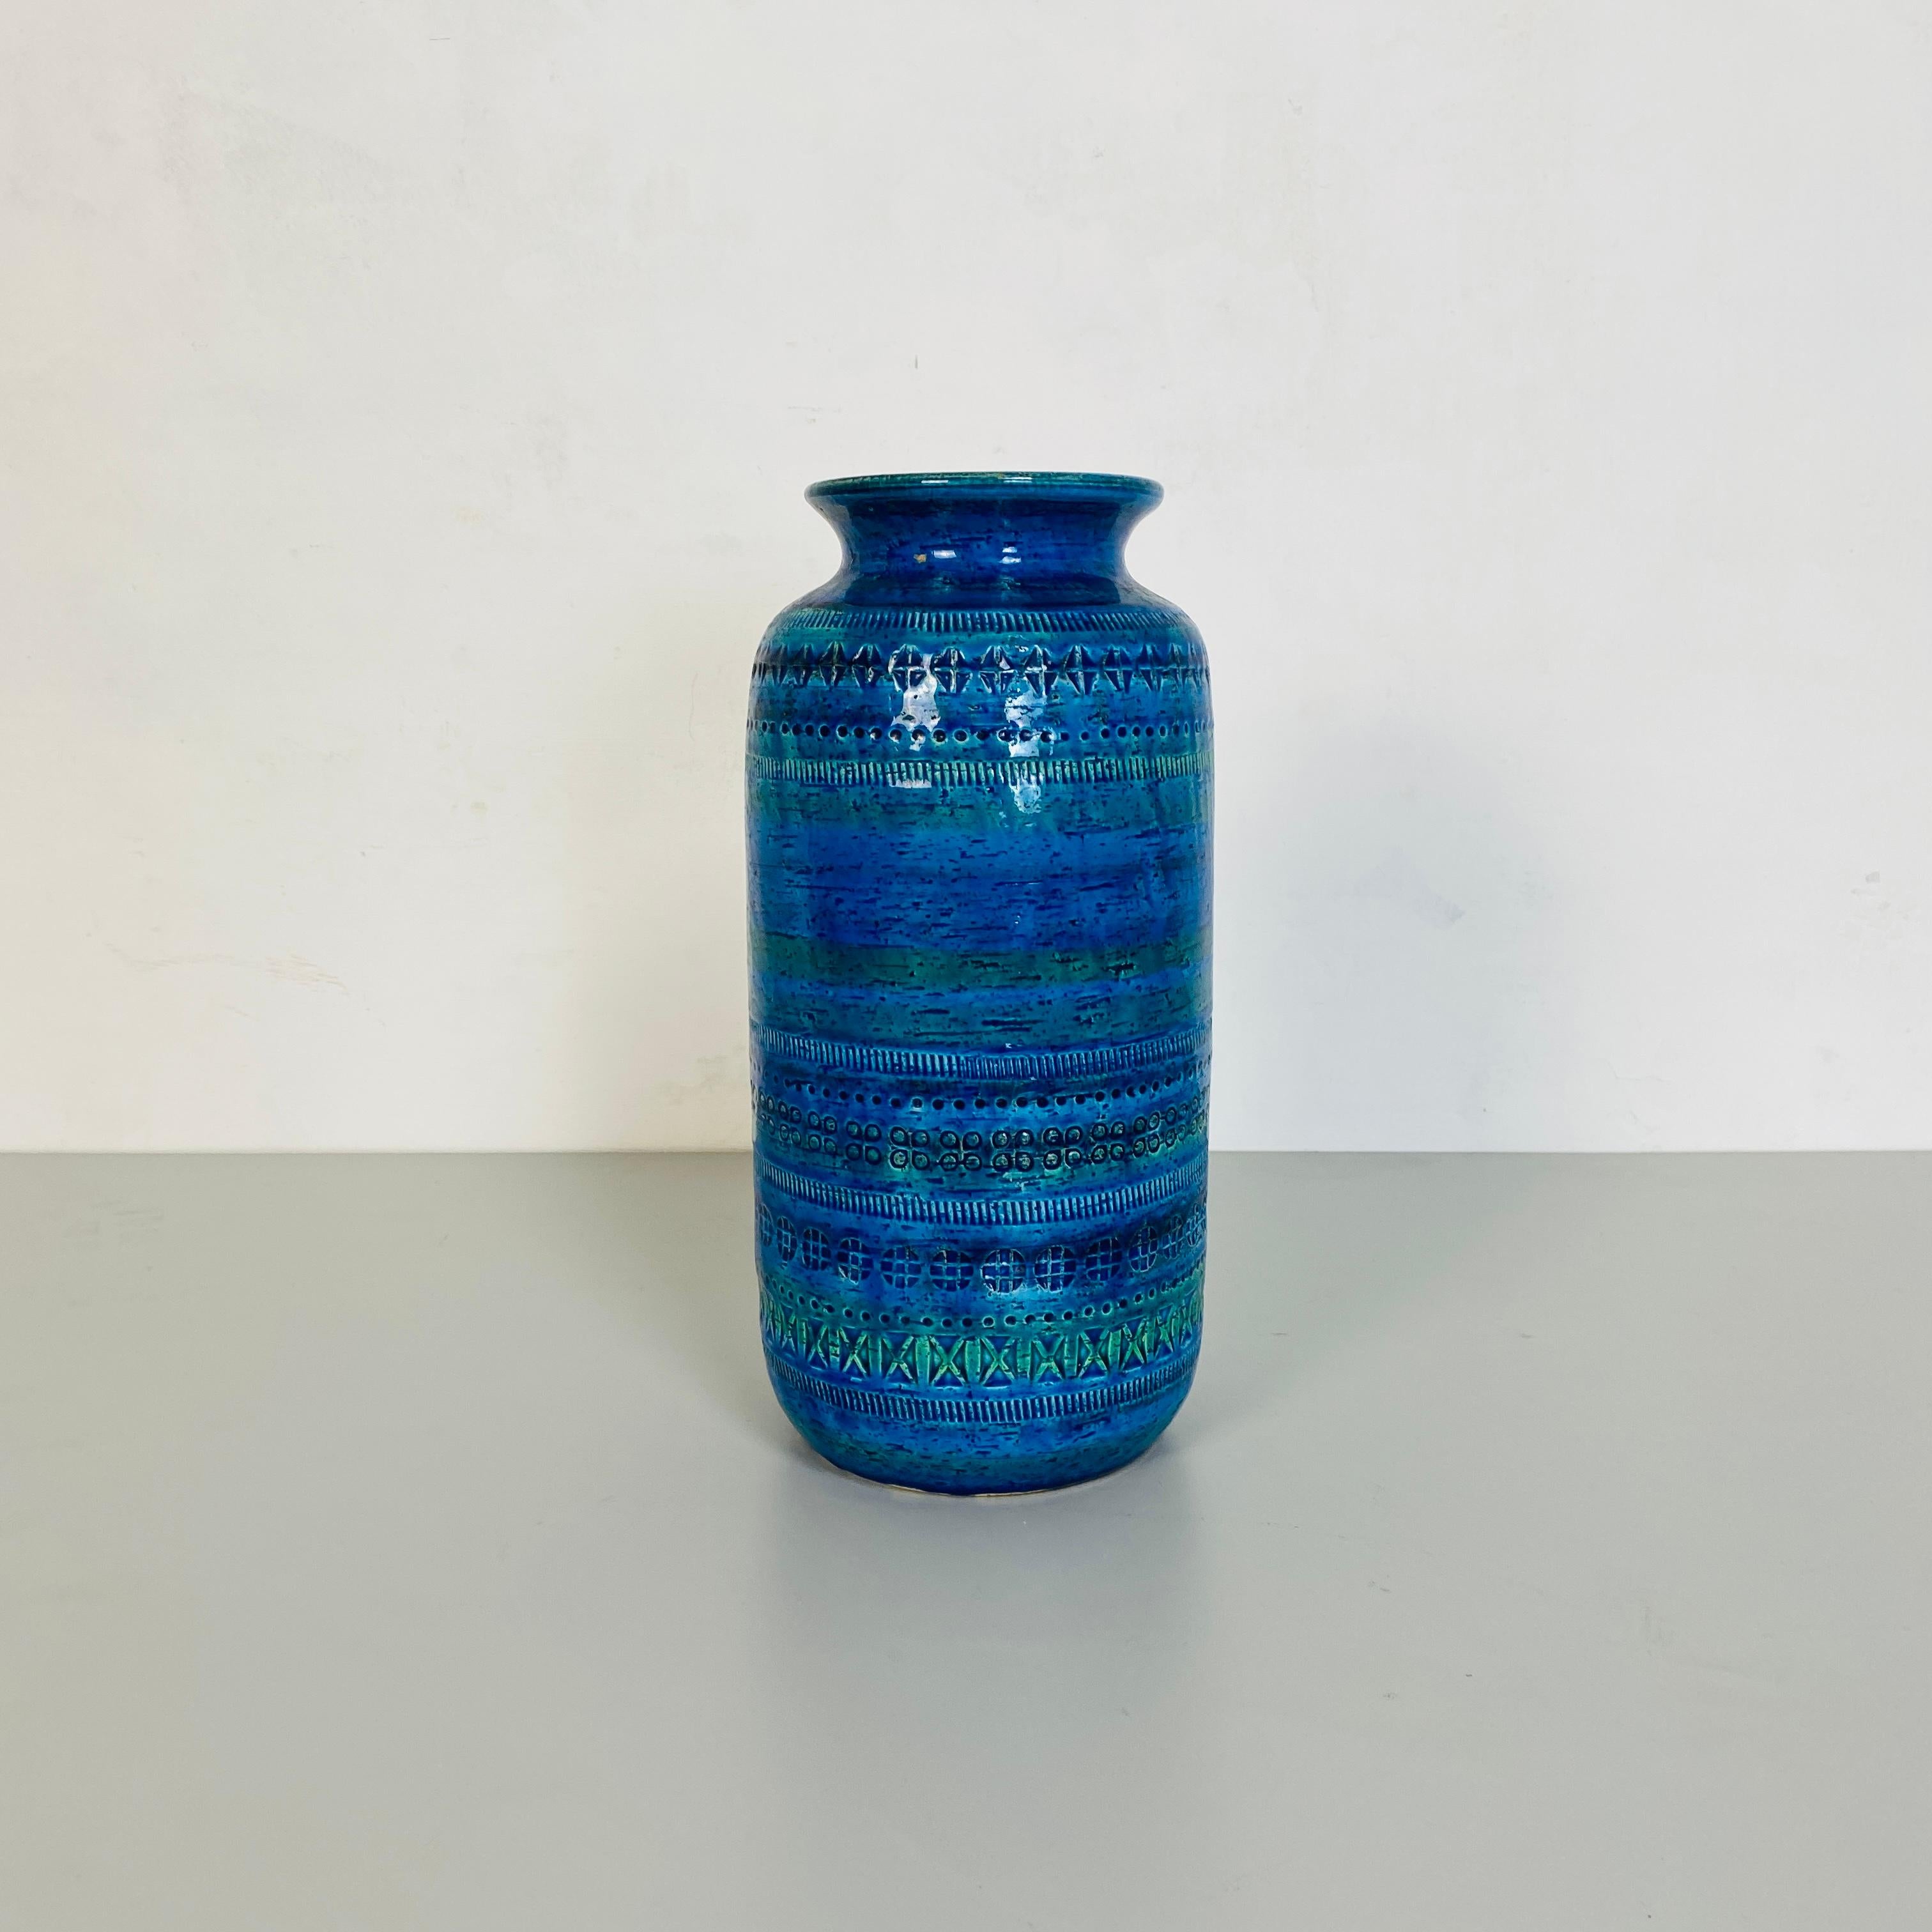 Italian Mid-Century Modern blue decorated vase by Bitossi, 1970s
Ceramic vase with decorations in shades of blue, Bitossi series.

1960s

Good conditions.

Measurements in cm 17 x 30 H.